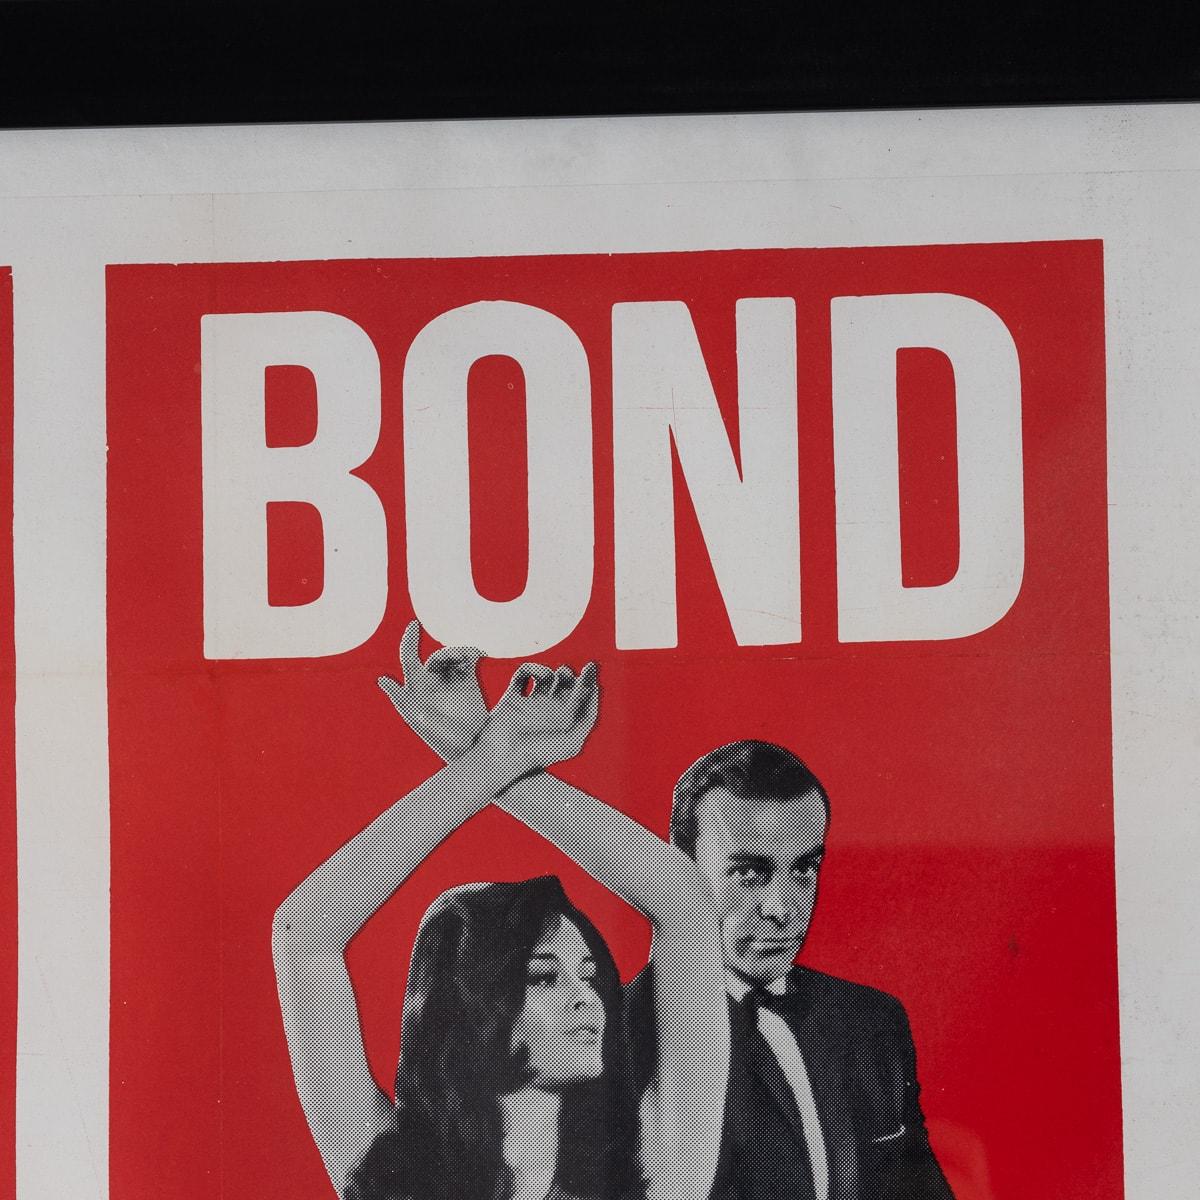 Other Original American (U.S) Release James Bond 'From Russia With Love' Poster c.1963 For Sale